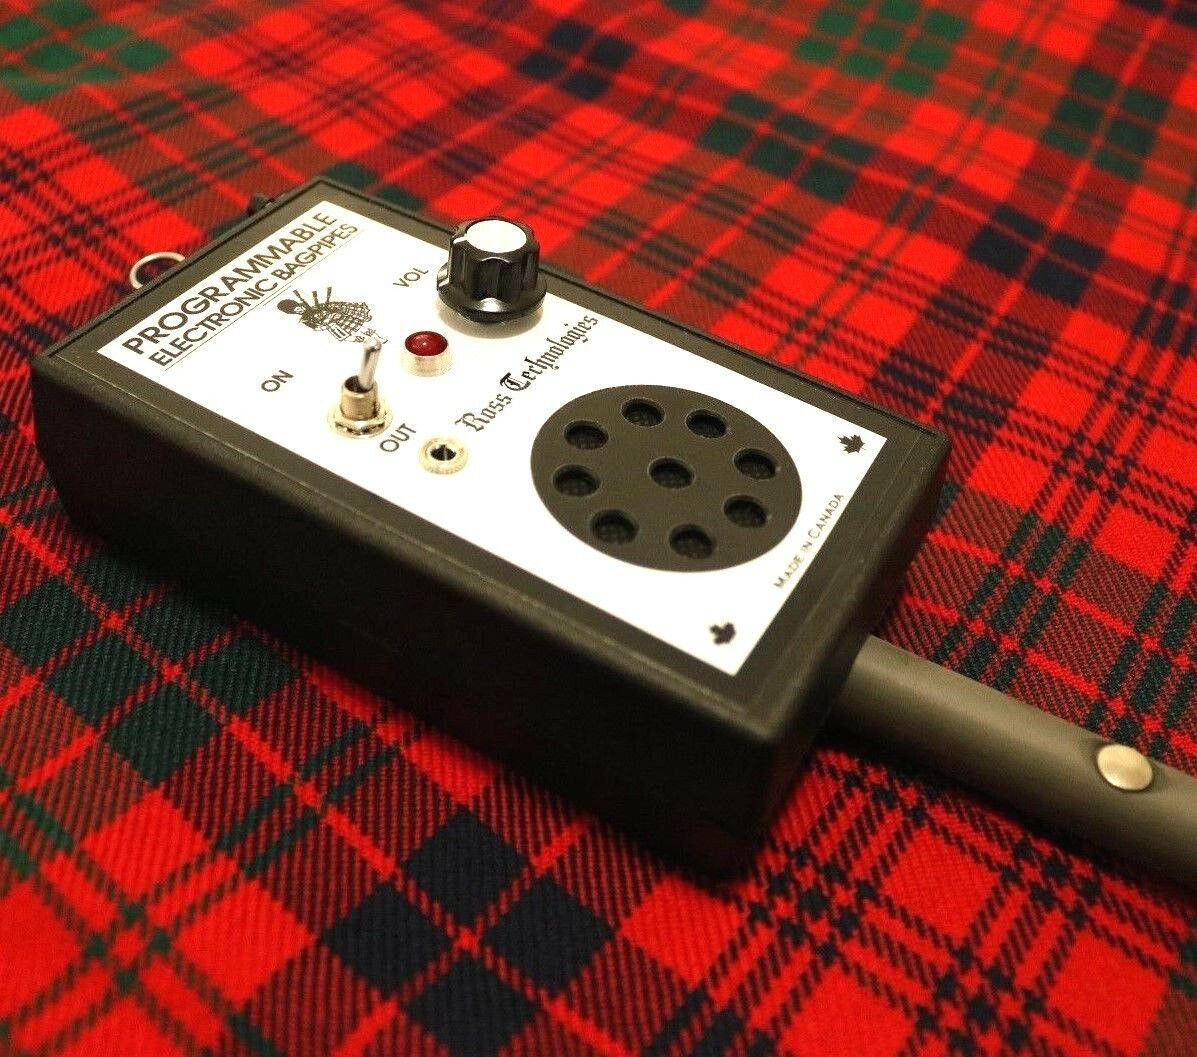 Ross Electronic Bagpipes - Electronic Practice Chanter With Built-in Speaker